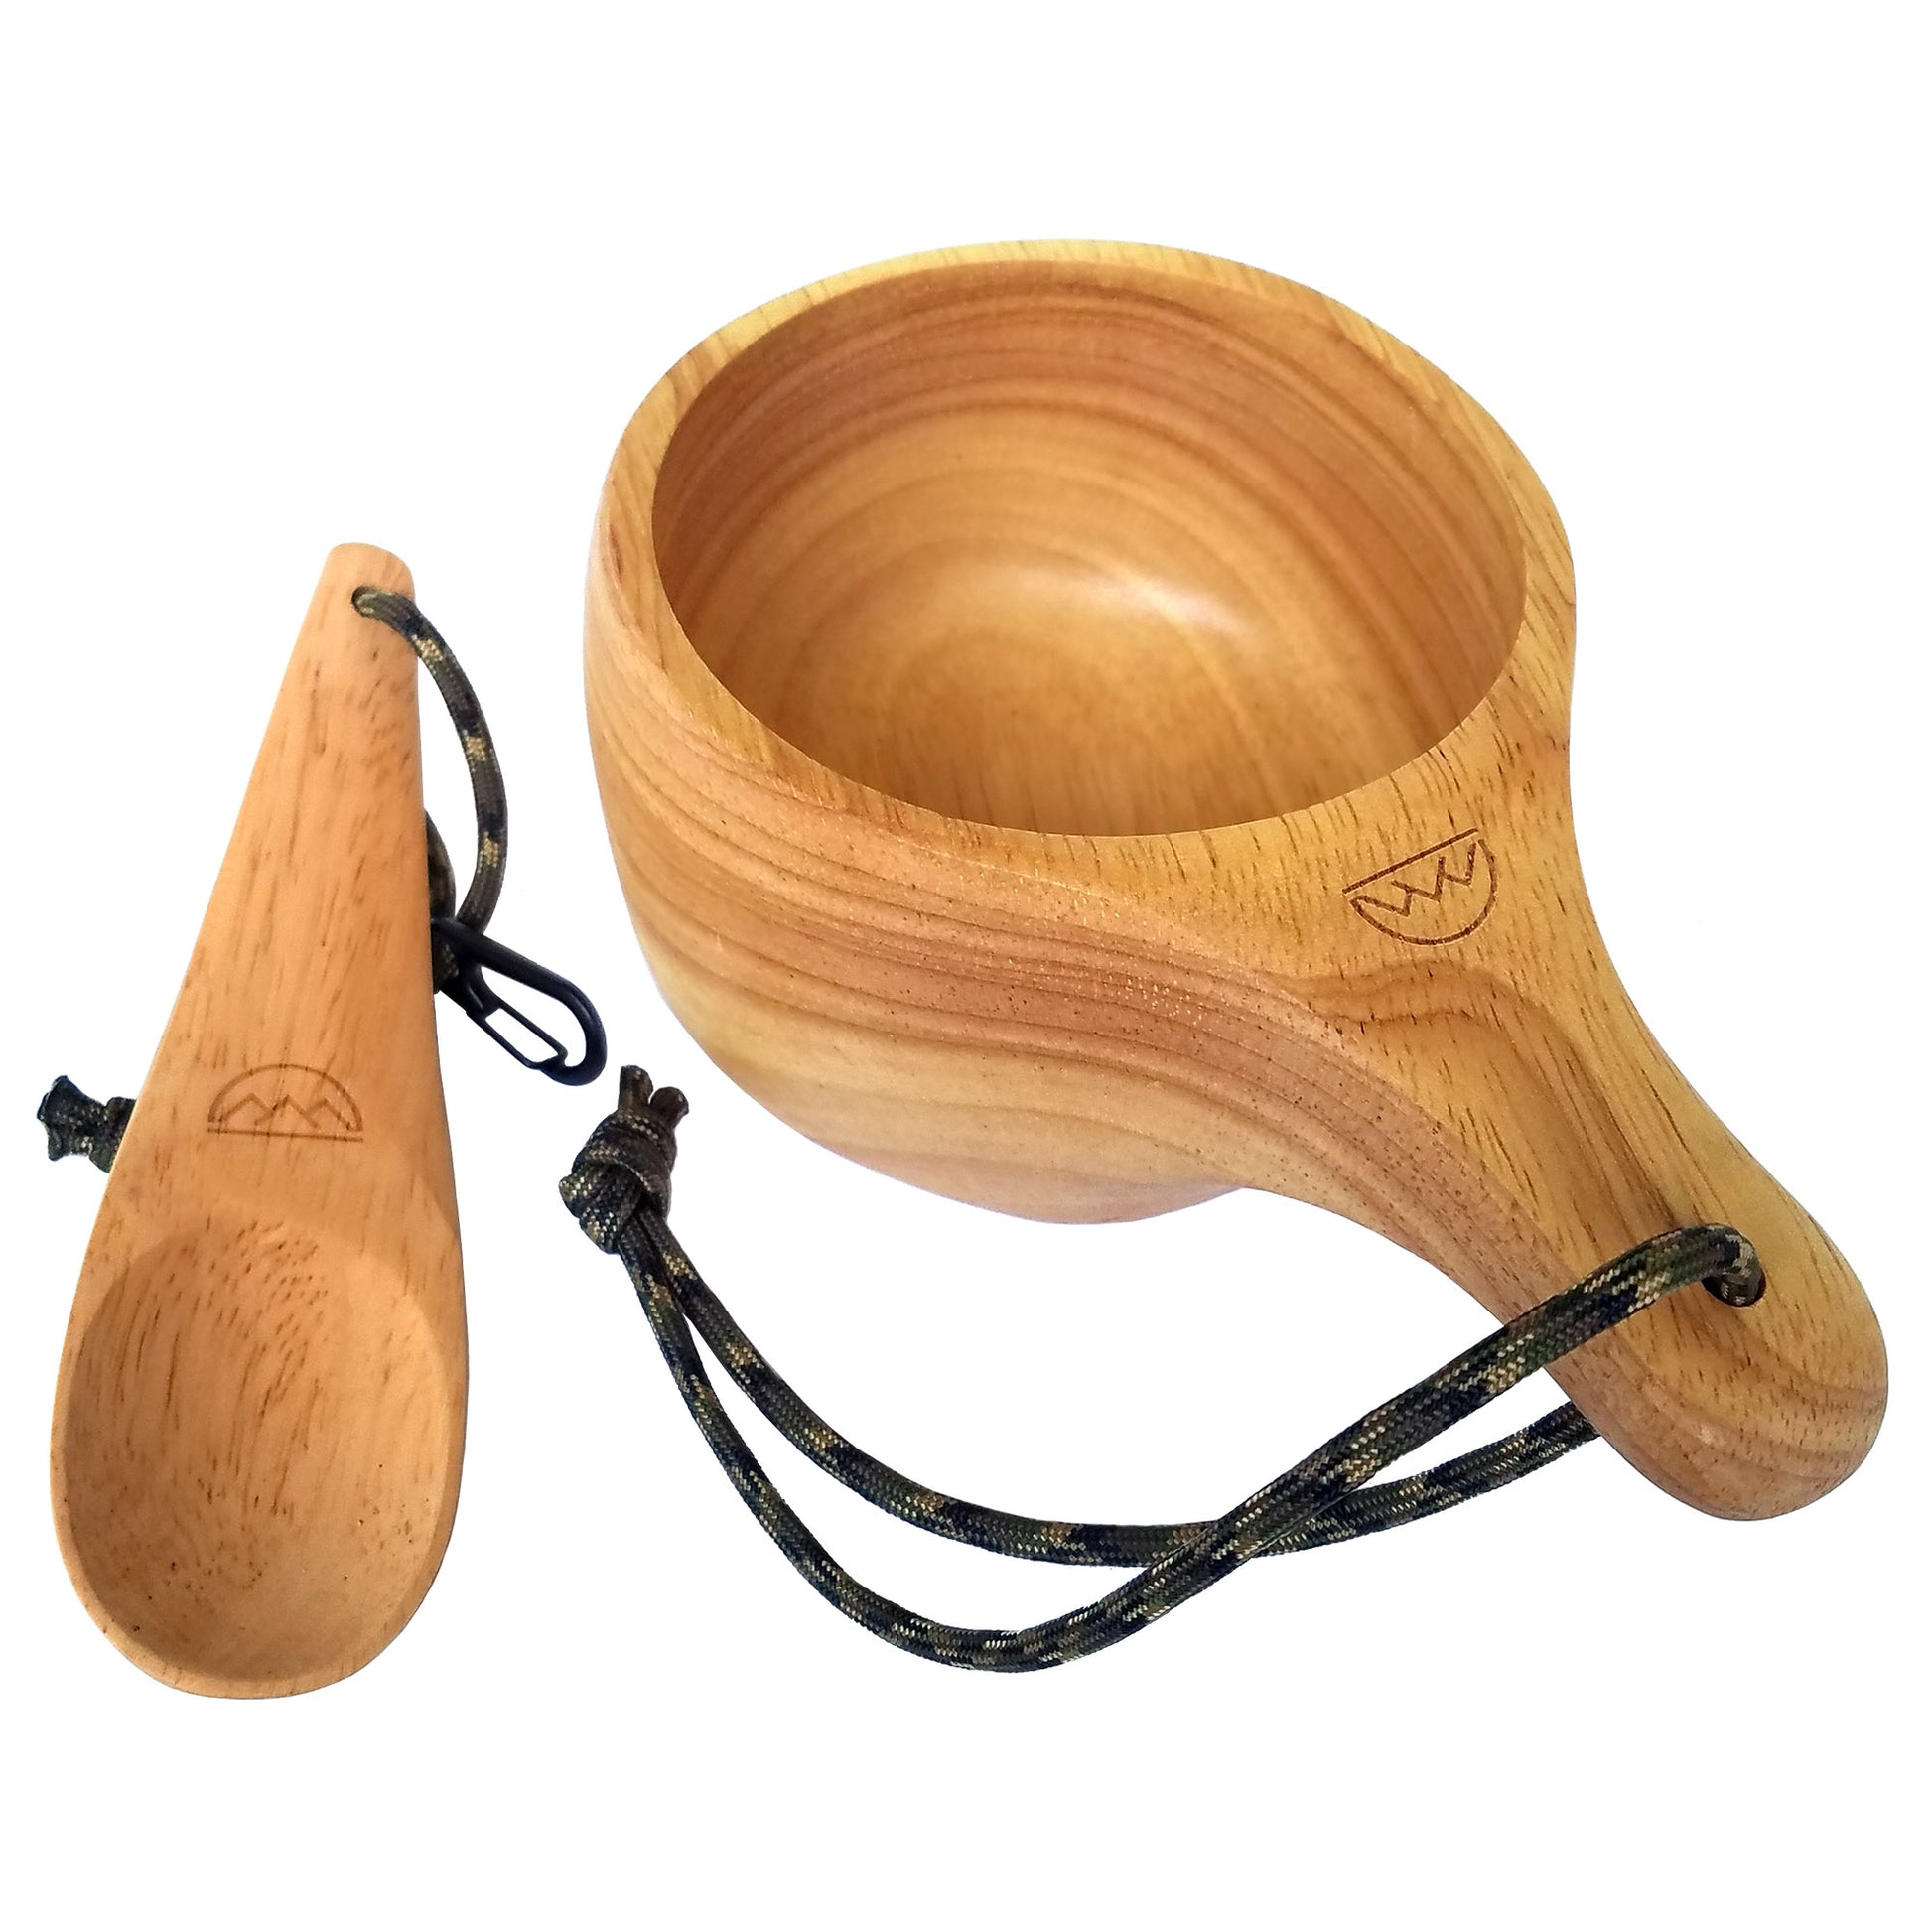  BeneGreat Kuksa Hand Carved Wooden Mug- Kuksa Guksi Animals  Head Image Cup, Lightweight , for Travelers, Outdoor Camping, Bushcraft  Drinking Camp Cup,Nice Gift for Who Likes Nature (Bear): Home & Kitchen